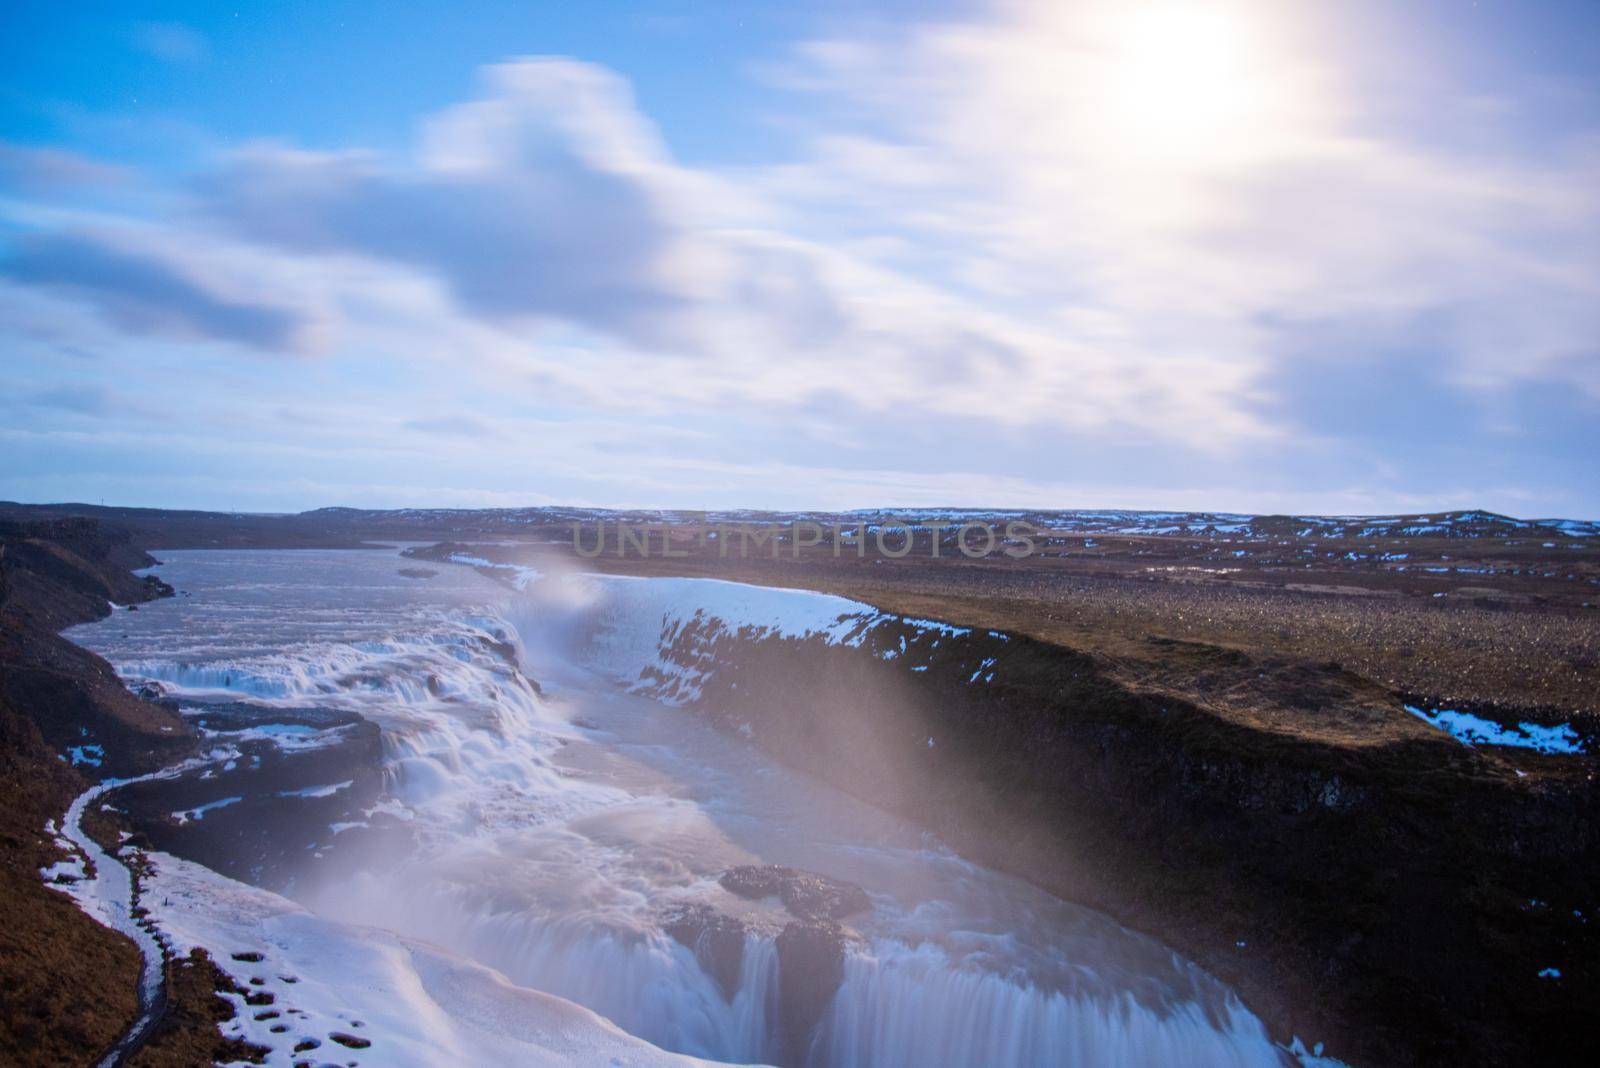 Godafoss waterfall in Iceland at sunset by jyurinko